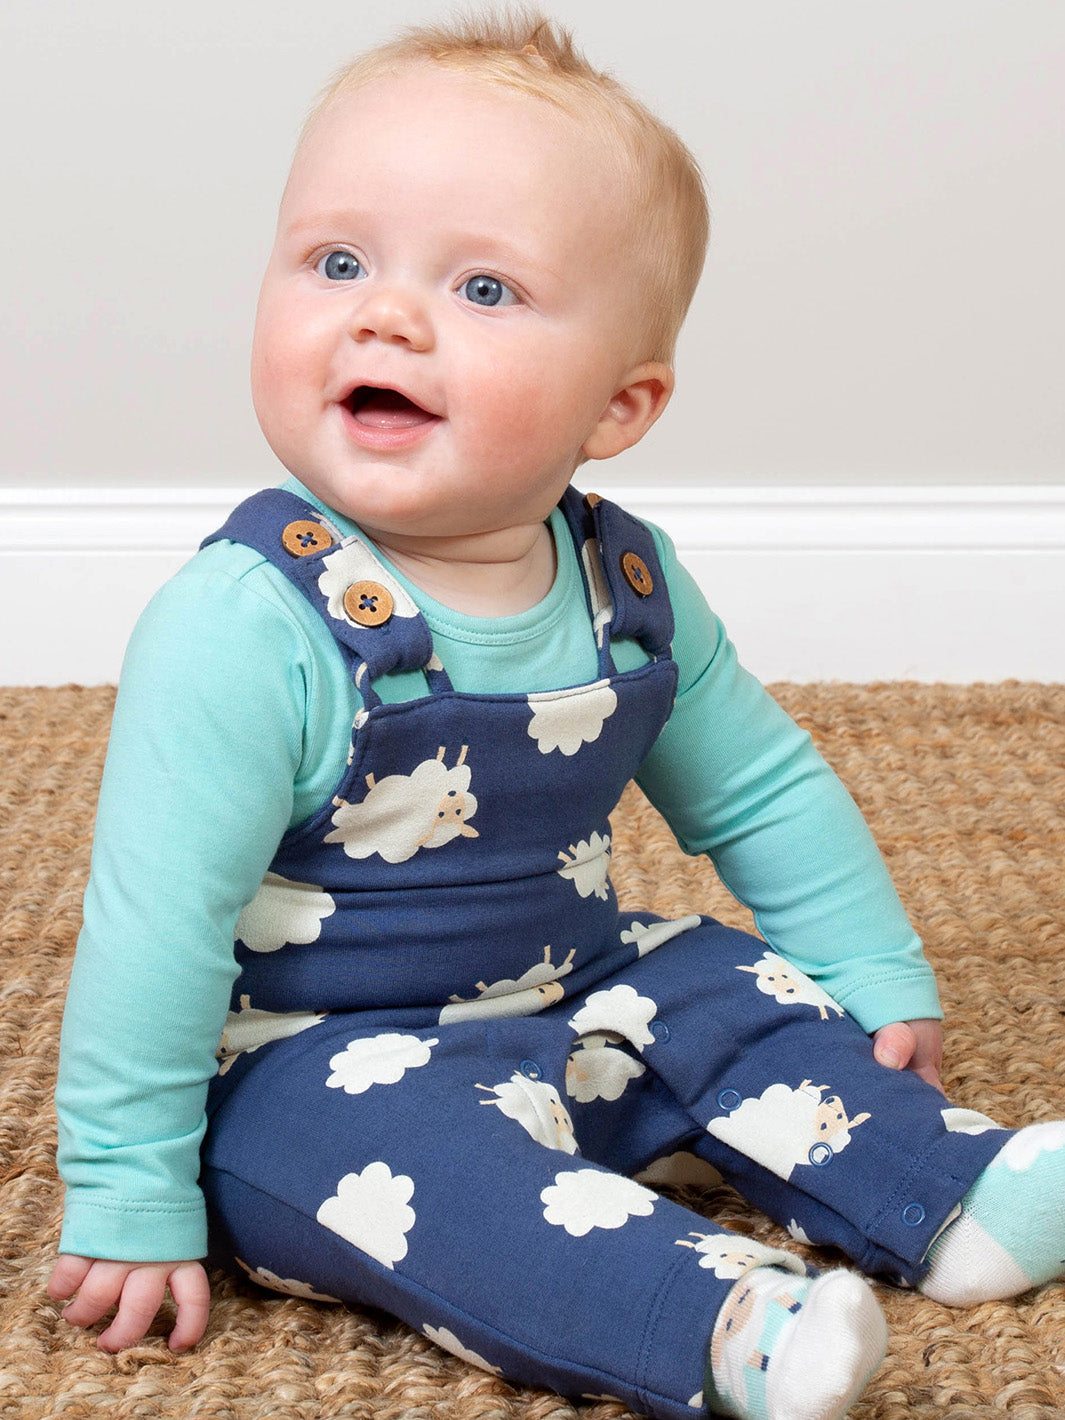 Kite Sheepy Clouds Dungarees SALE